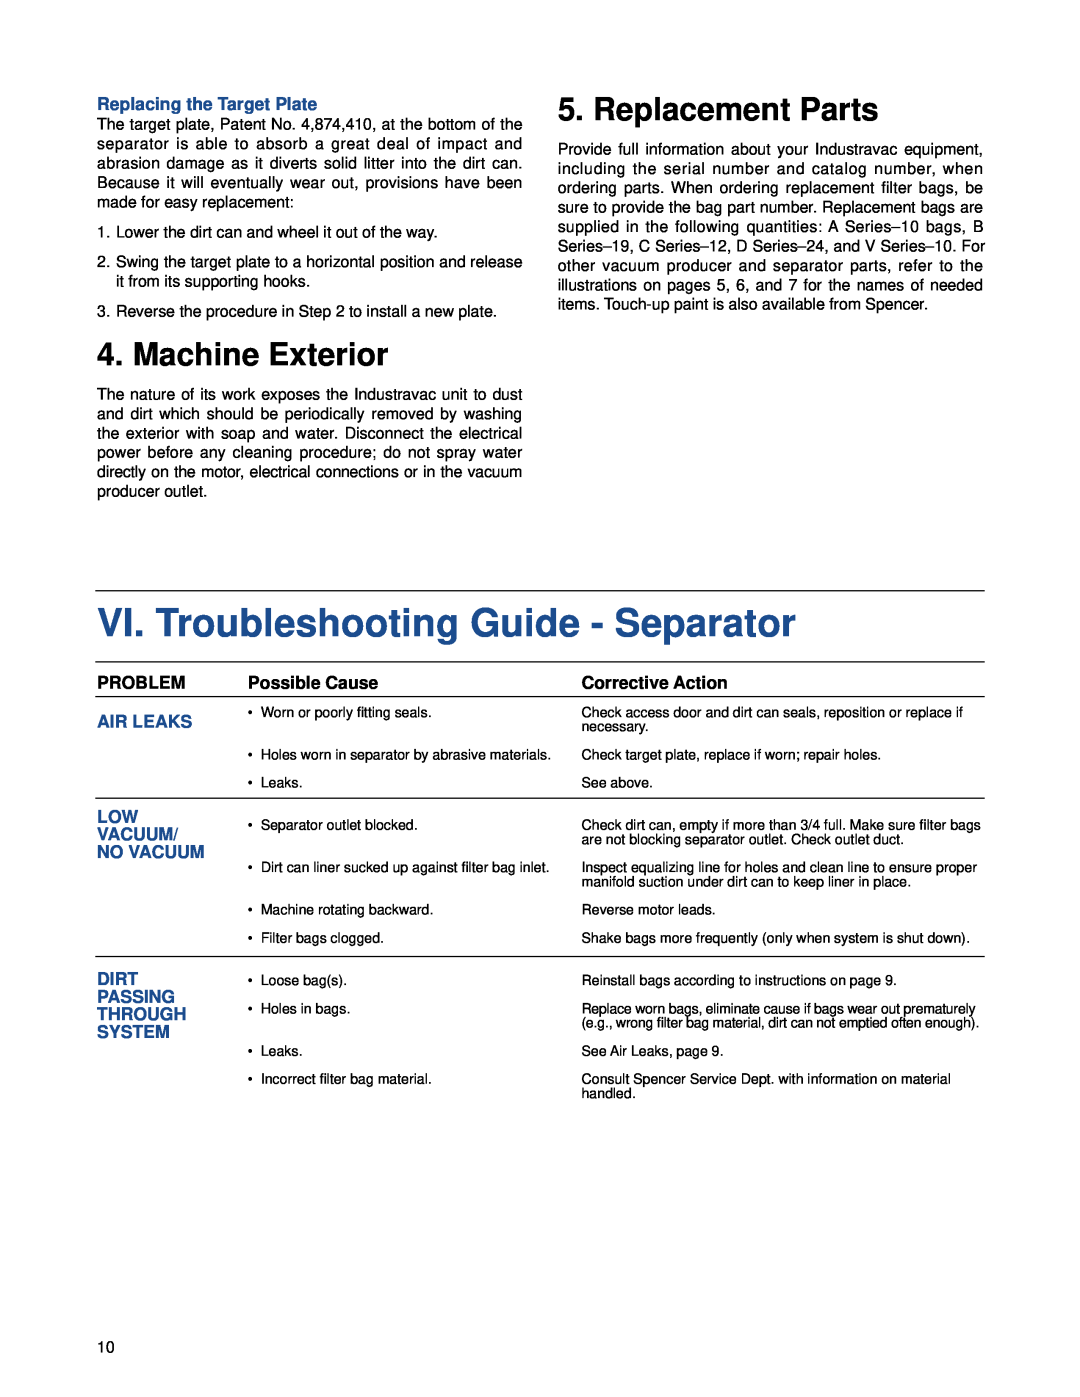 Windsor A VI. Troubleshooting Guide - Separator, Replacement Parts, Machine Exterior, Replacing the Target Plate, Problem 